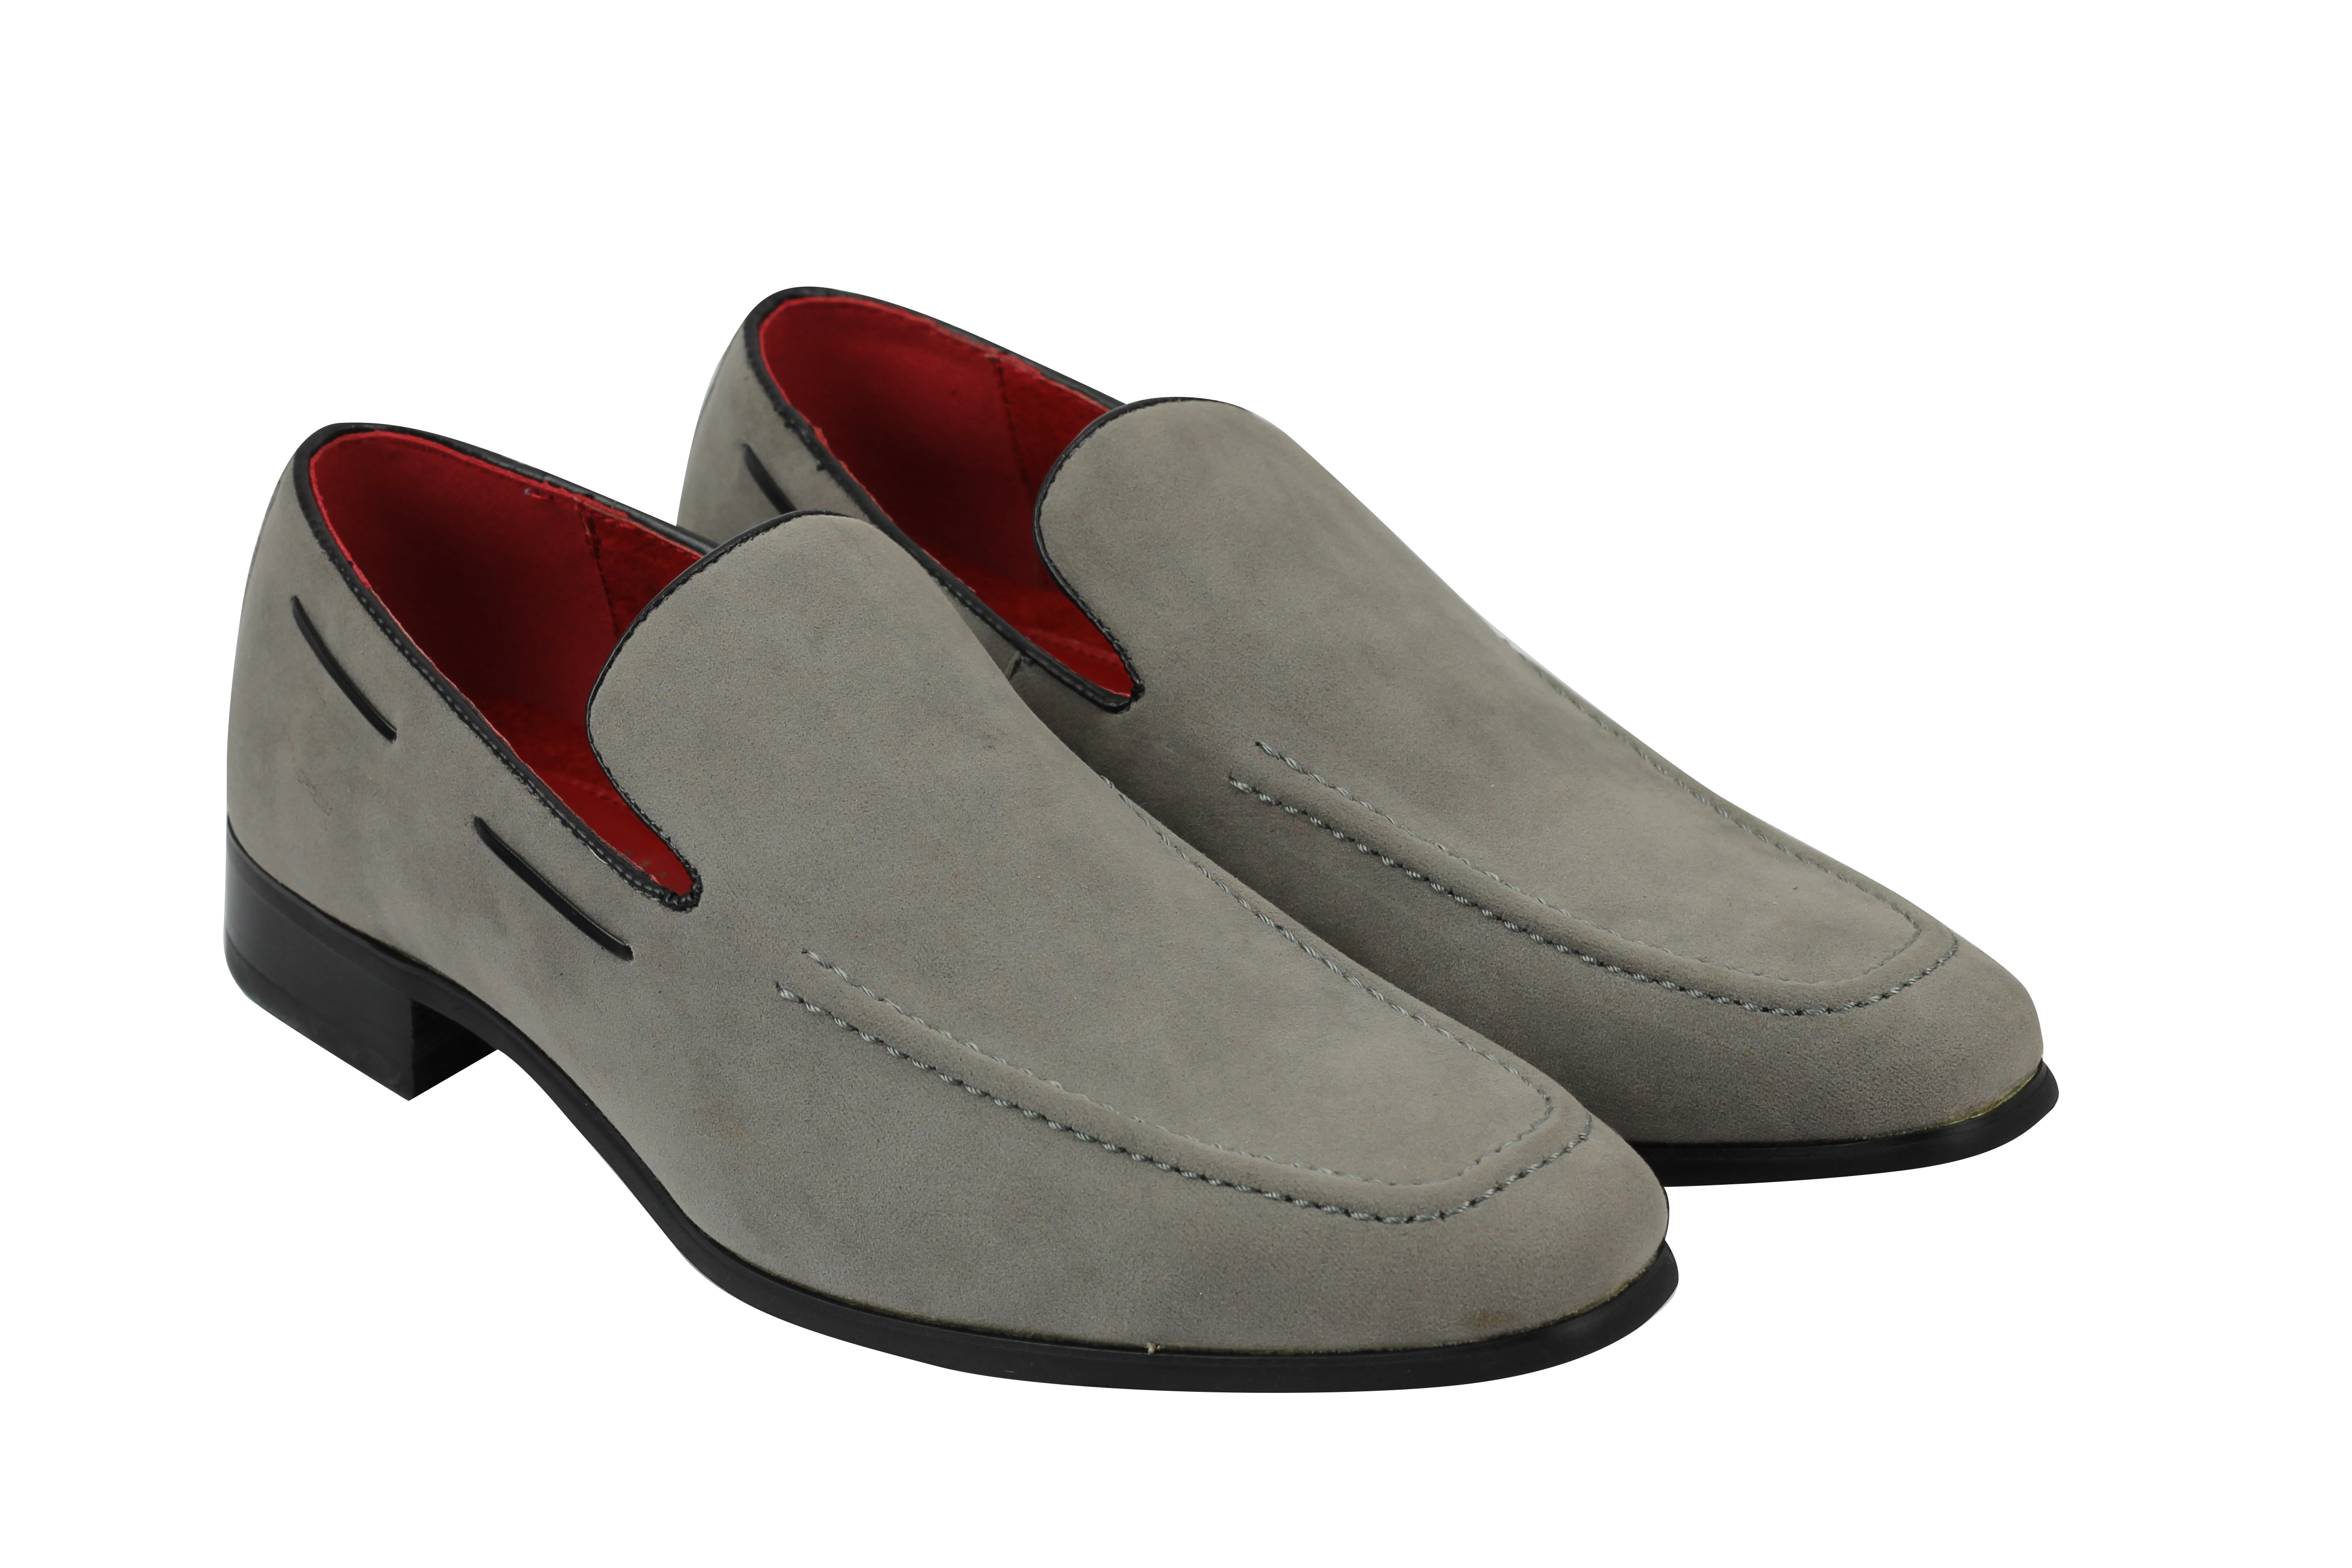 Mens Leather Line Suede Slip on Loafers Smart Casual Italian Style Driving Shoes | eBay